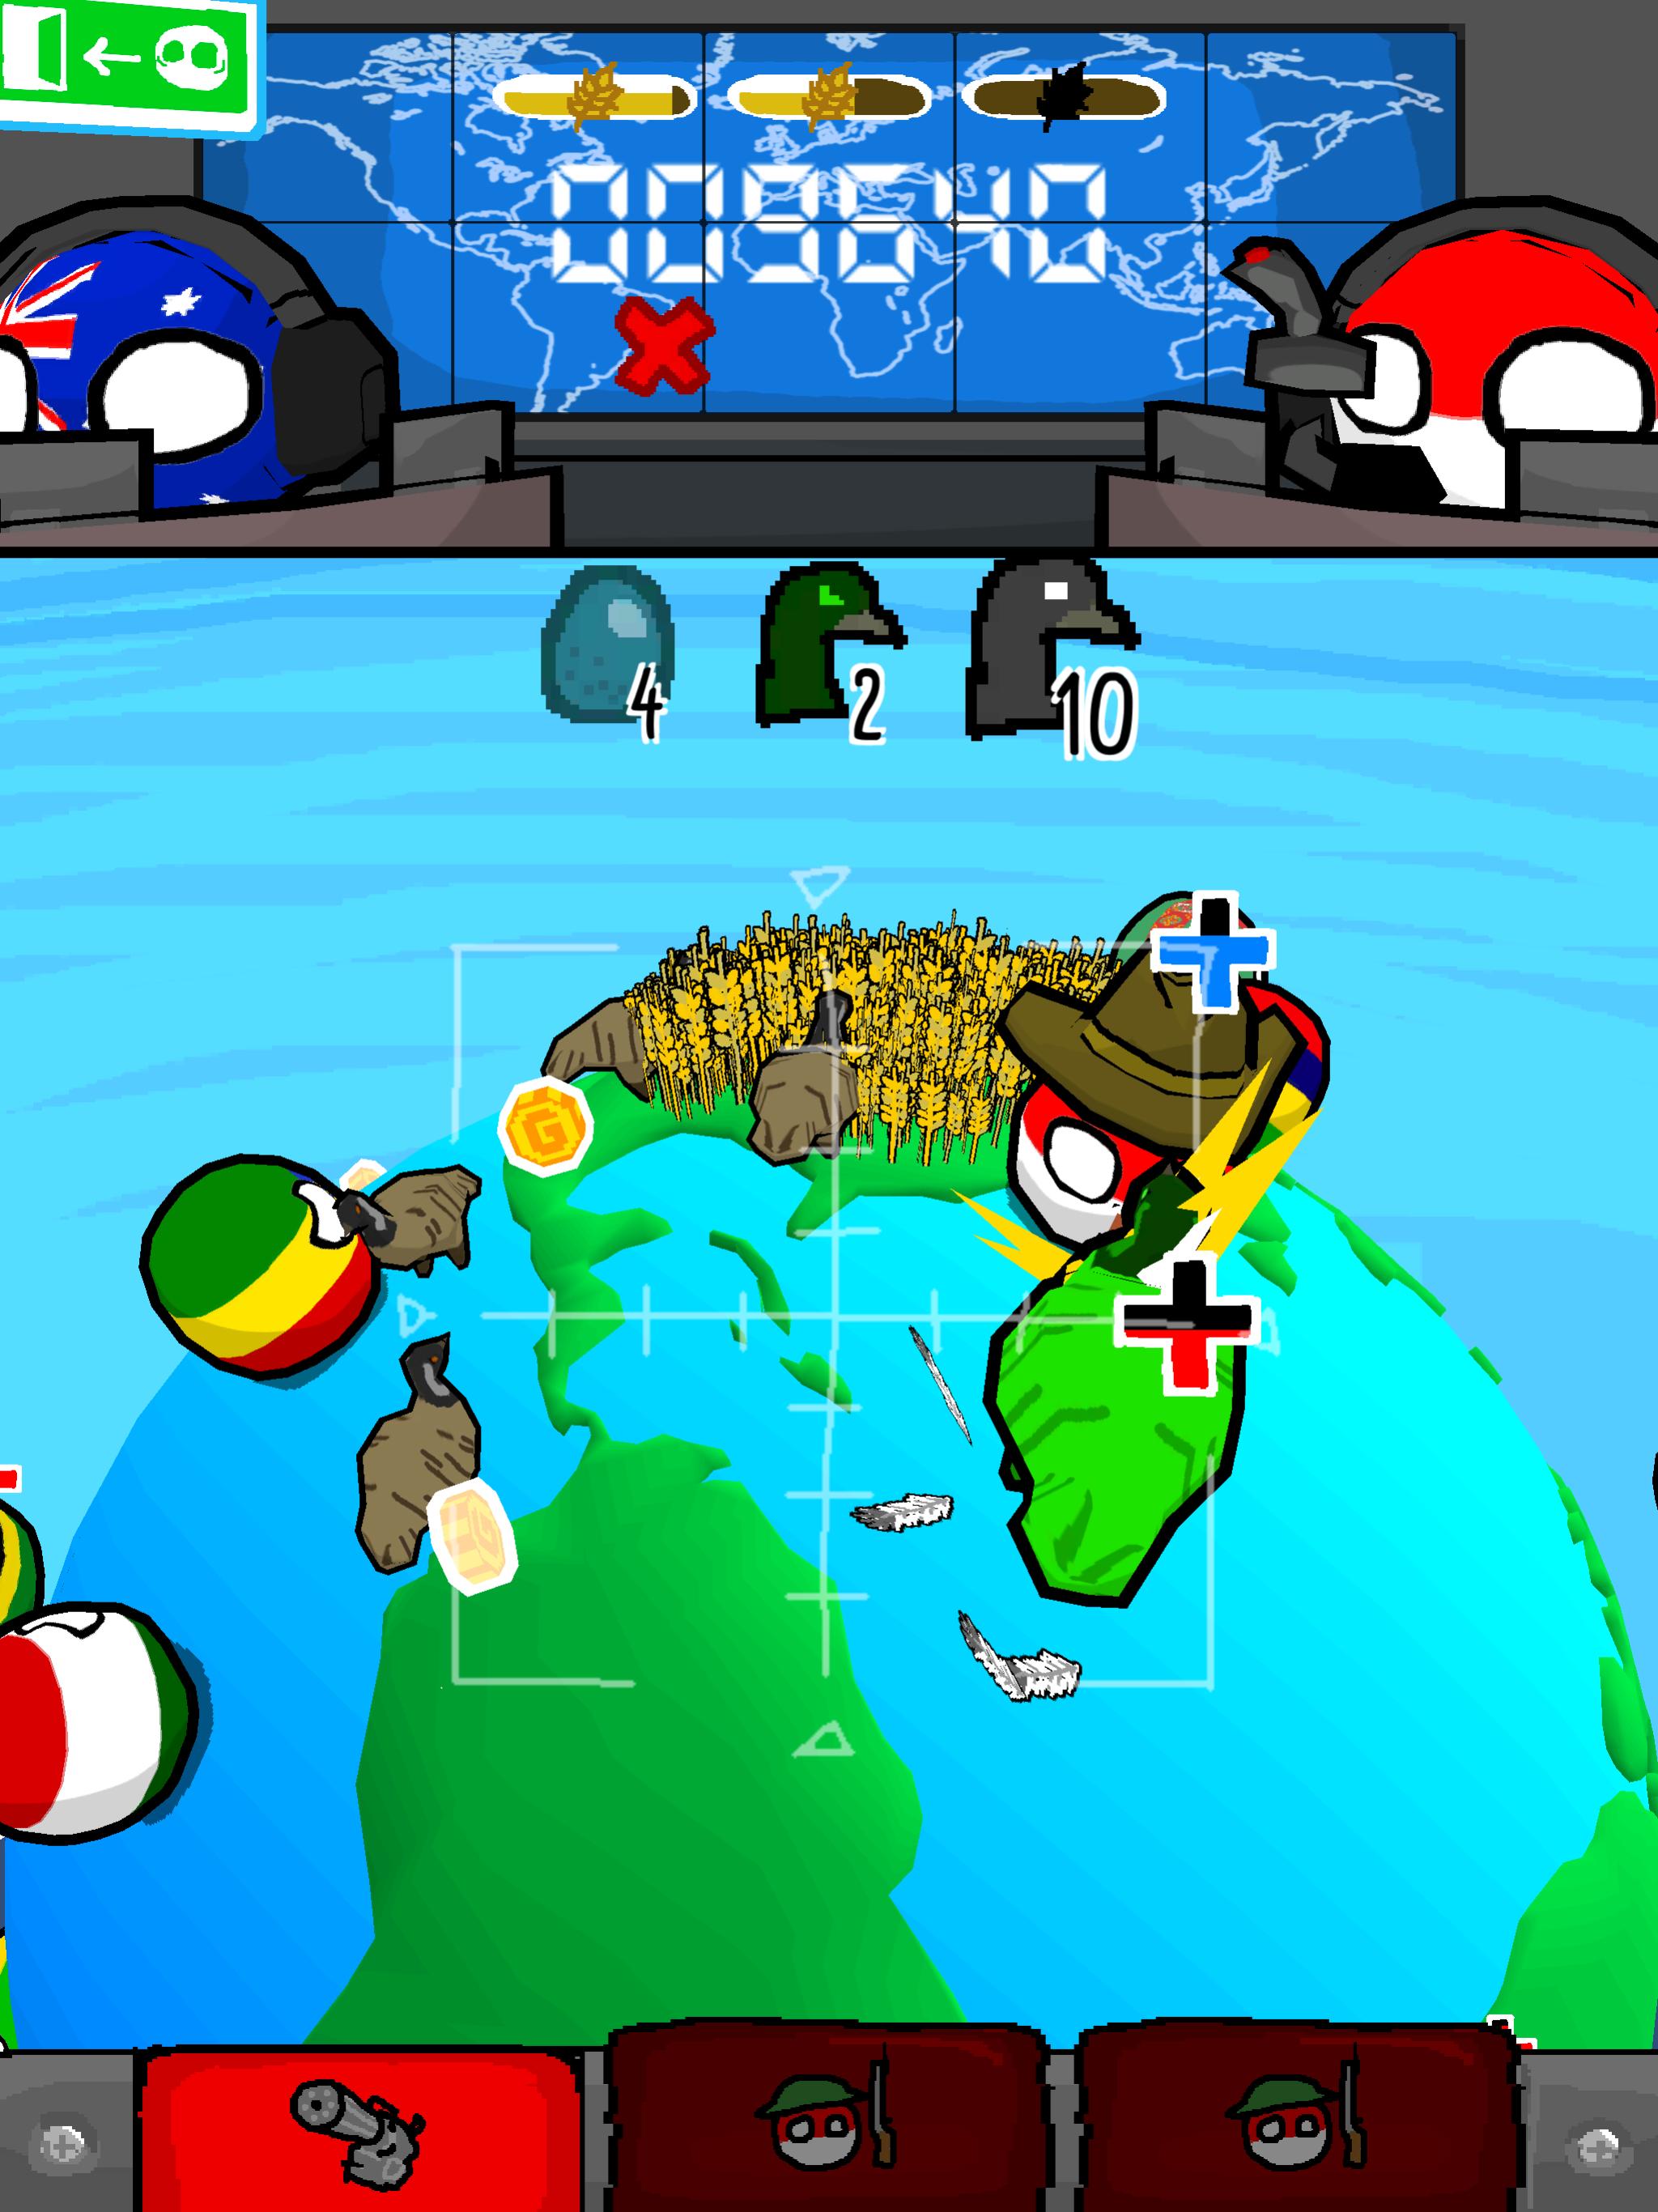 Polandball: Not Safe For World for Android - APK Download